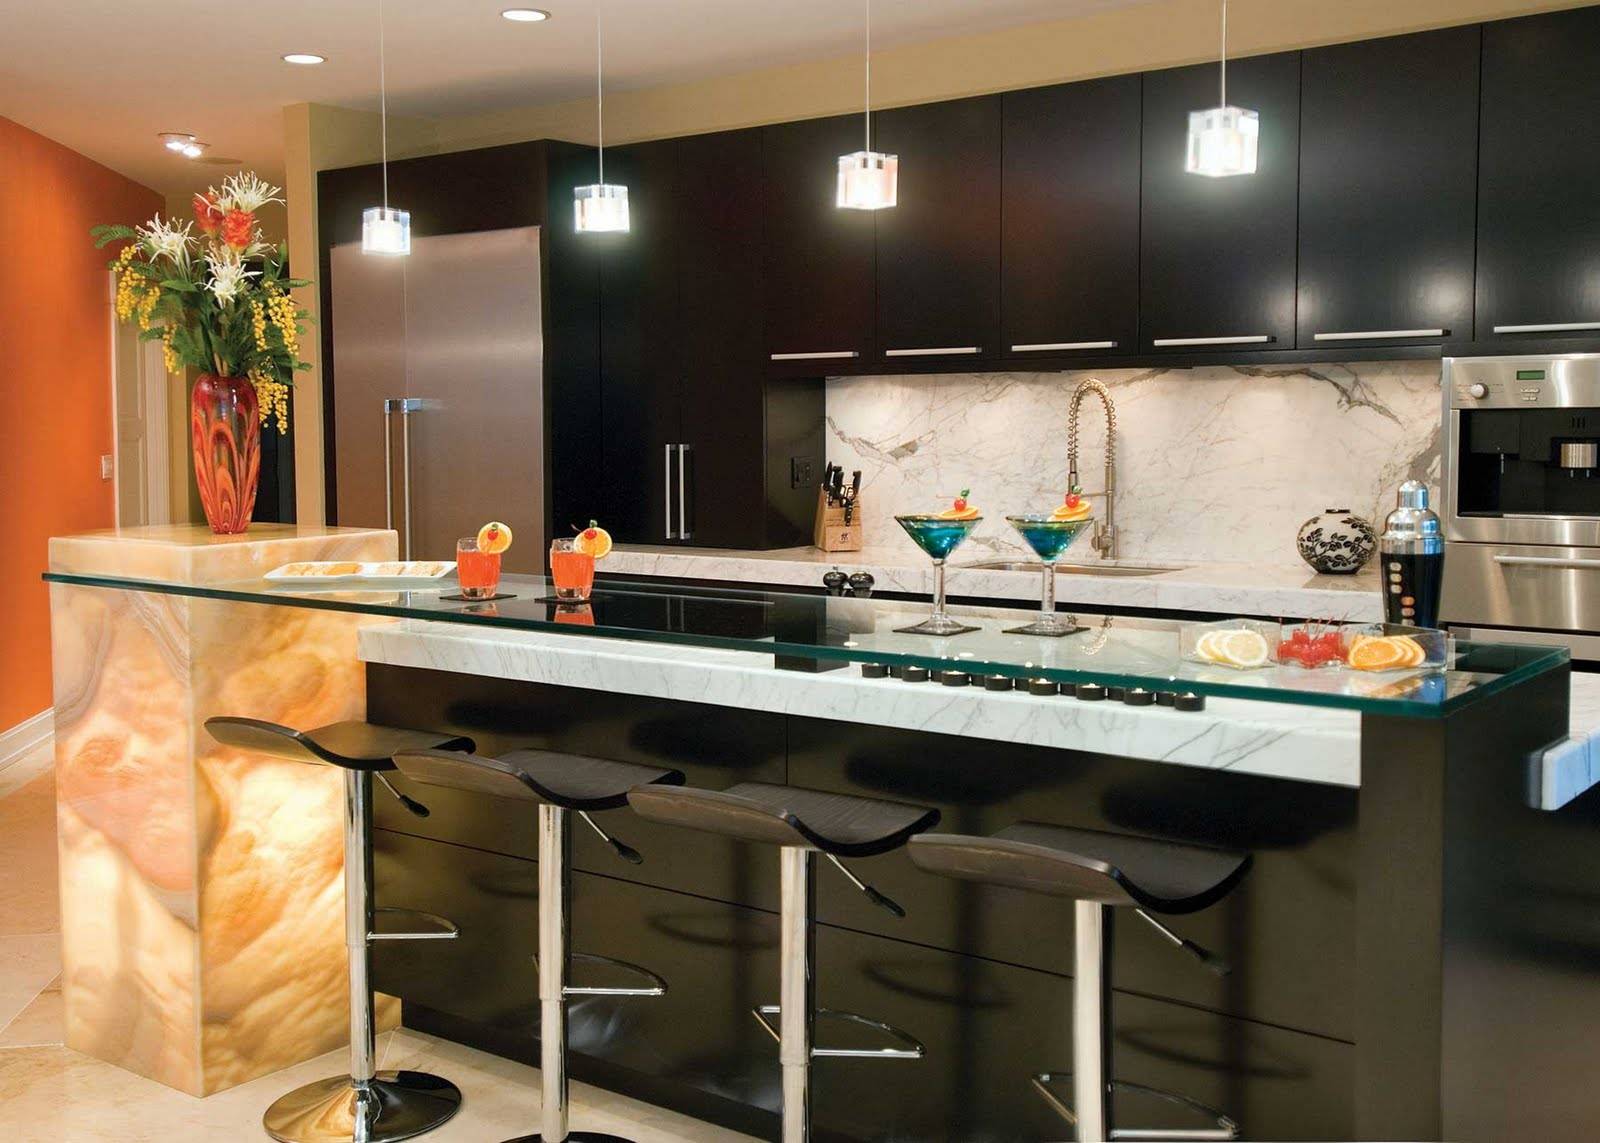 Spectacular black decorated kitchen zone with the island having glass top